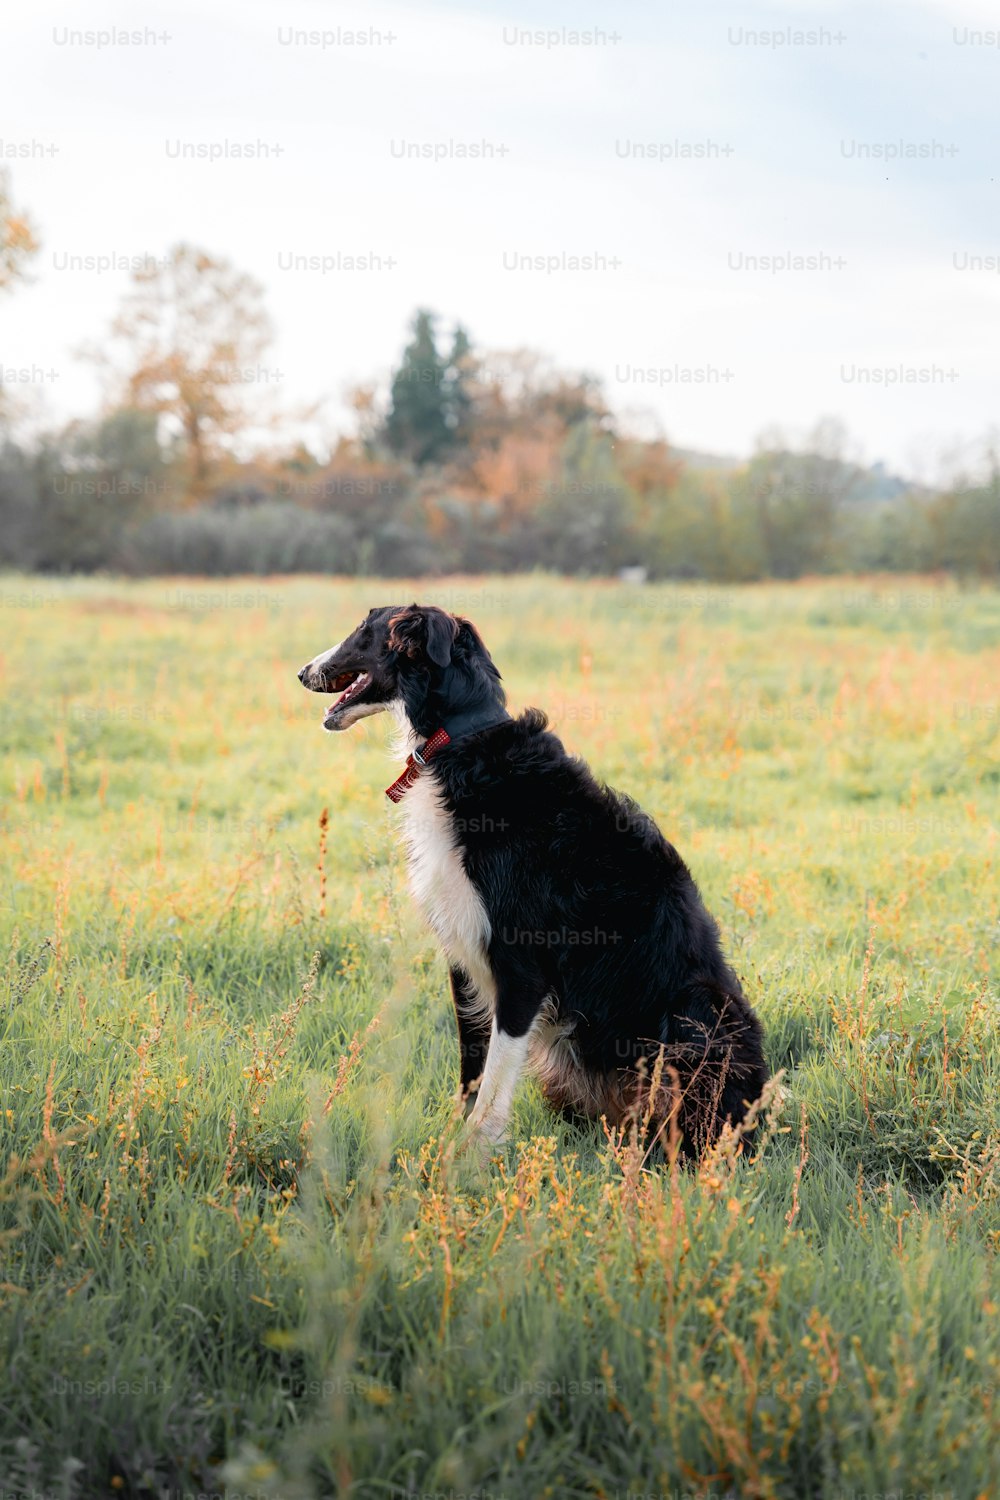 a black and white dog sitting in a field